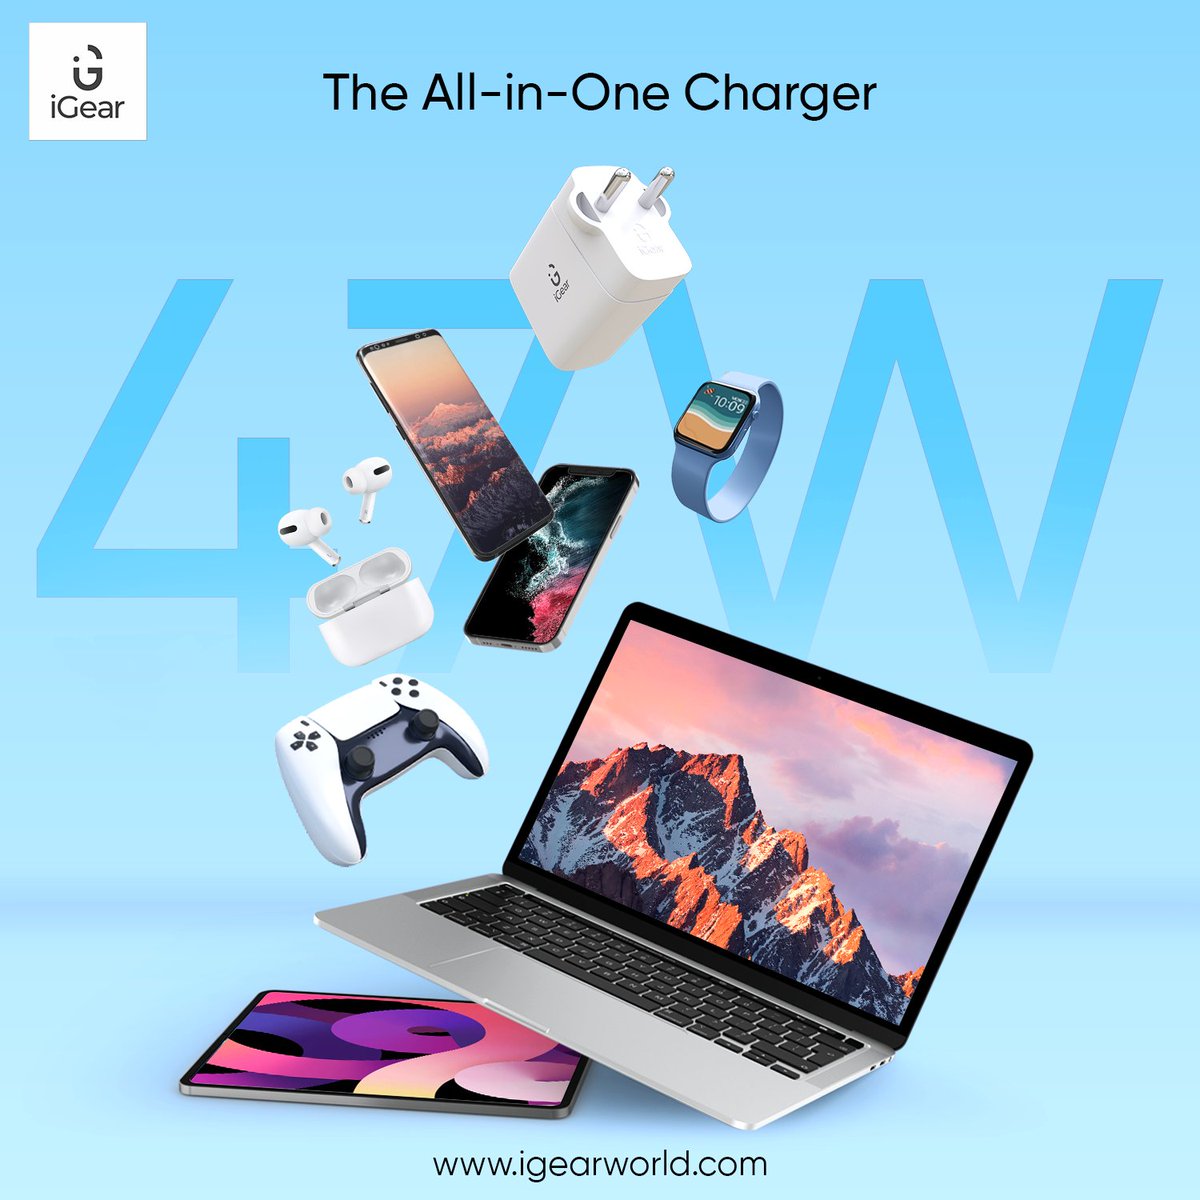 Charge ahead with the future of power! Our 47W charger with dual Type-C outputs, powered by cutting-edge GAN technology, delivers lightning-fast charging for your devices. To know more, visit igearworld.com #iGearWorld #iGearLifestyle #SeriouslySmart.